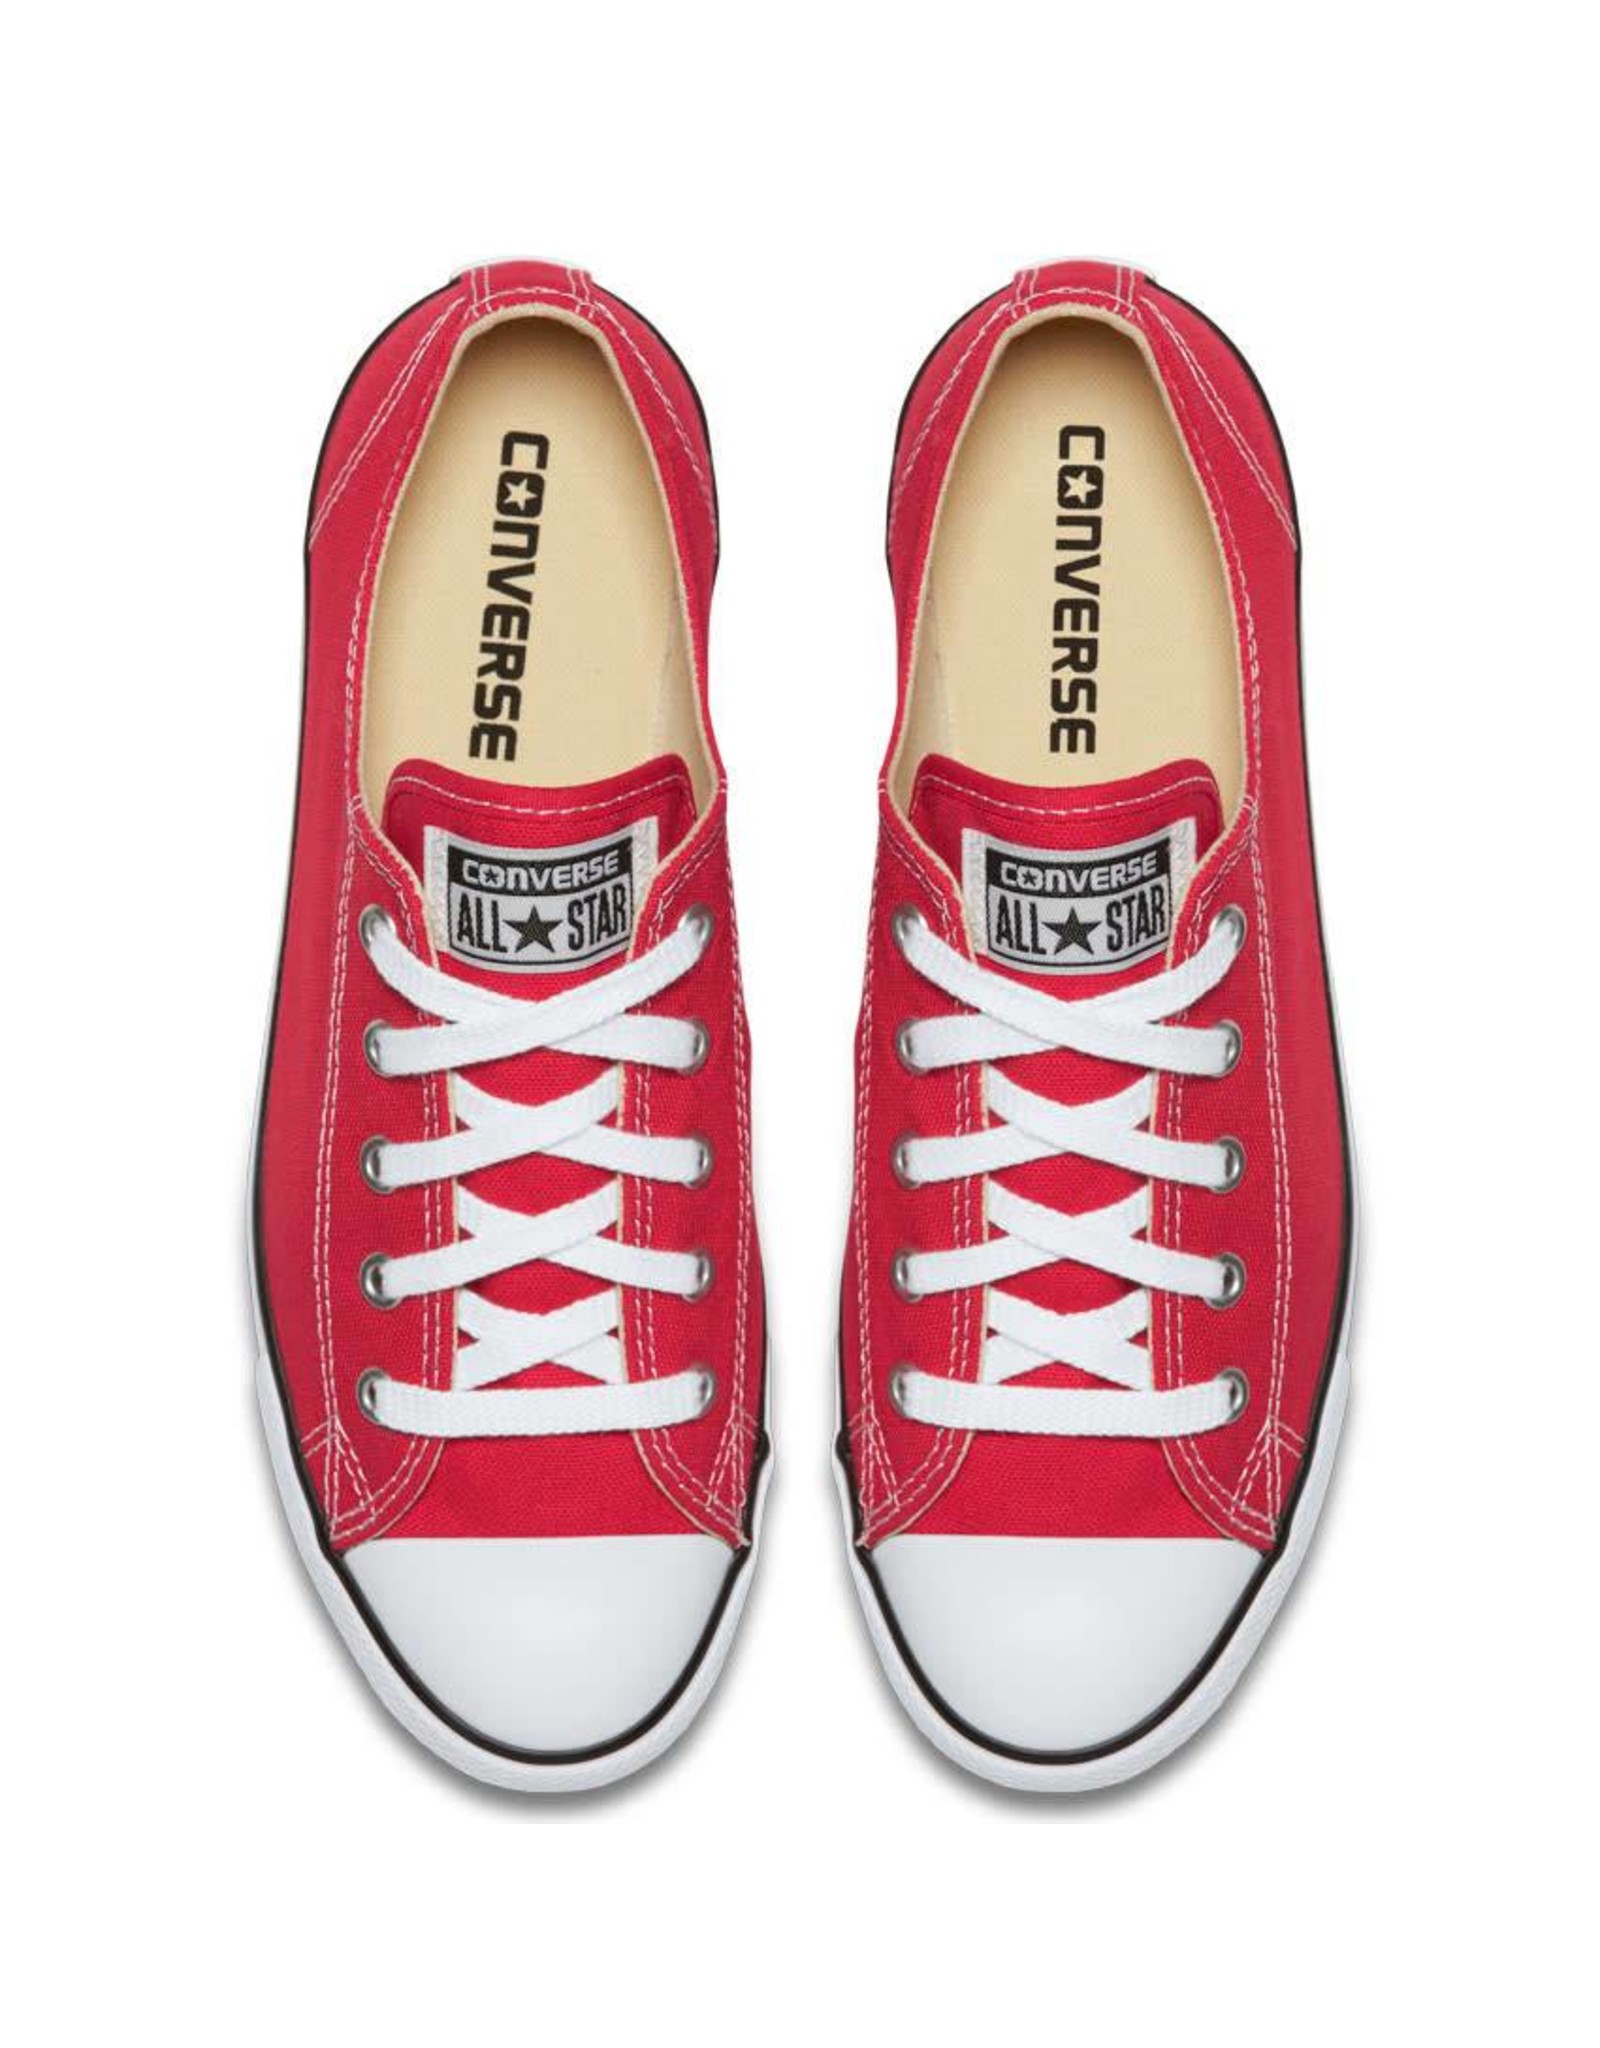 CHUCK TAYLOR DAINTY OX RED C40DCR-530056C